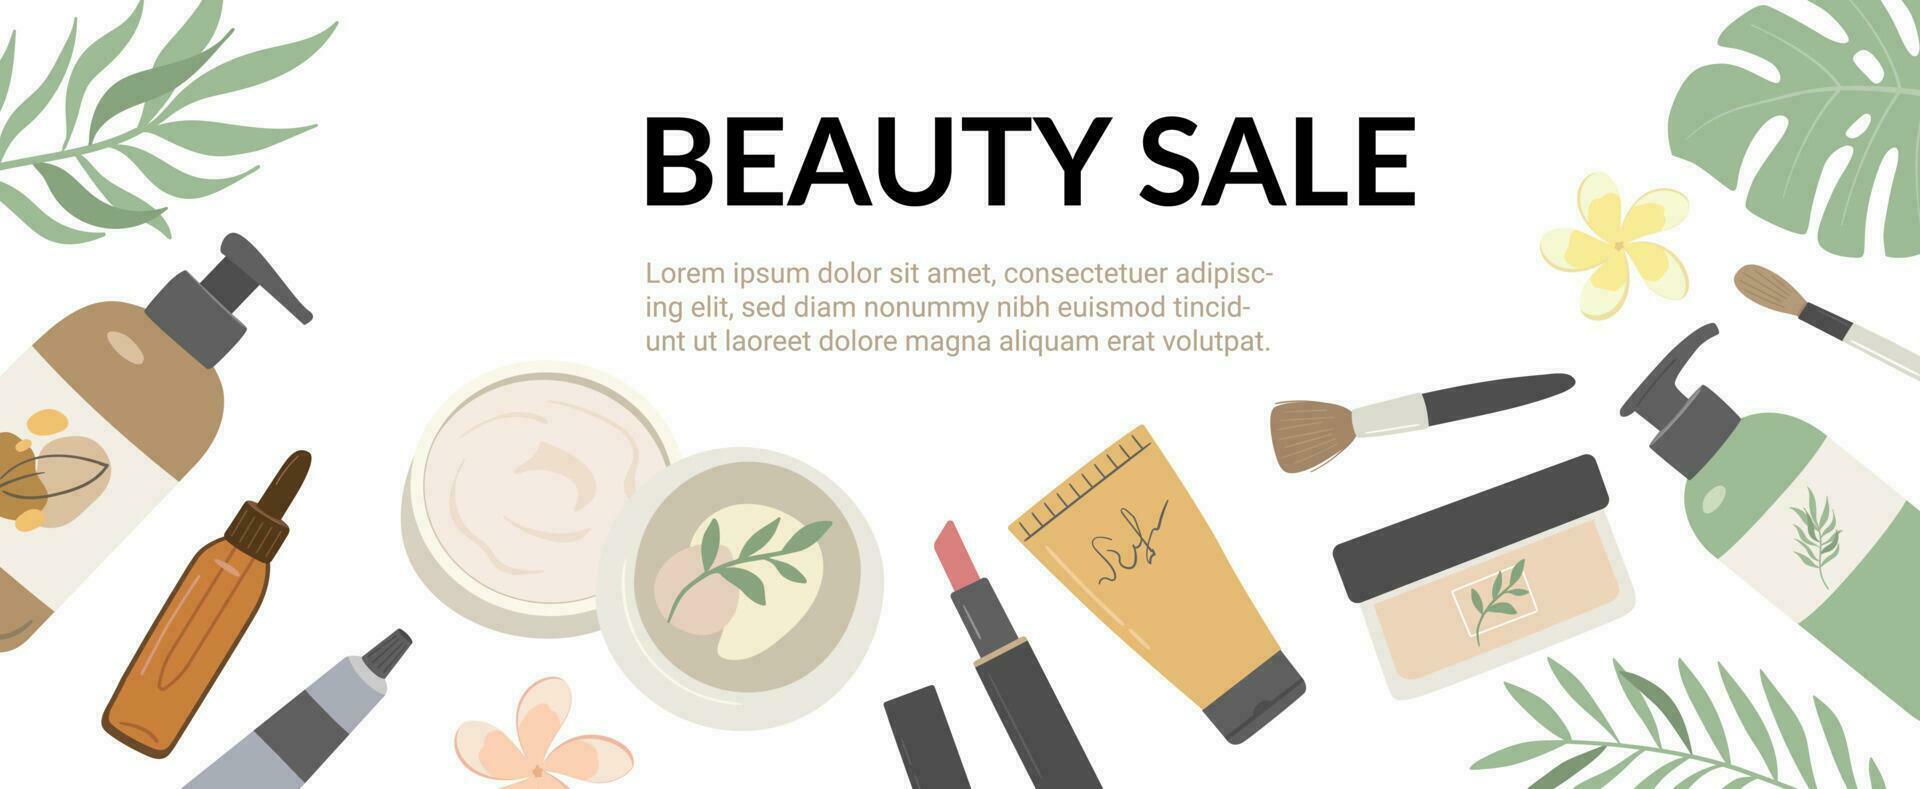 Cosmetic sale flat vector illustration. Beauty and skin care products online shopping. Cream, shampoo, lipstick, lotion, serum. Promotion banner, poster, flyer, web template, landing page